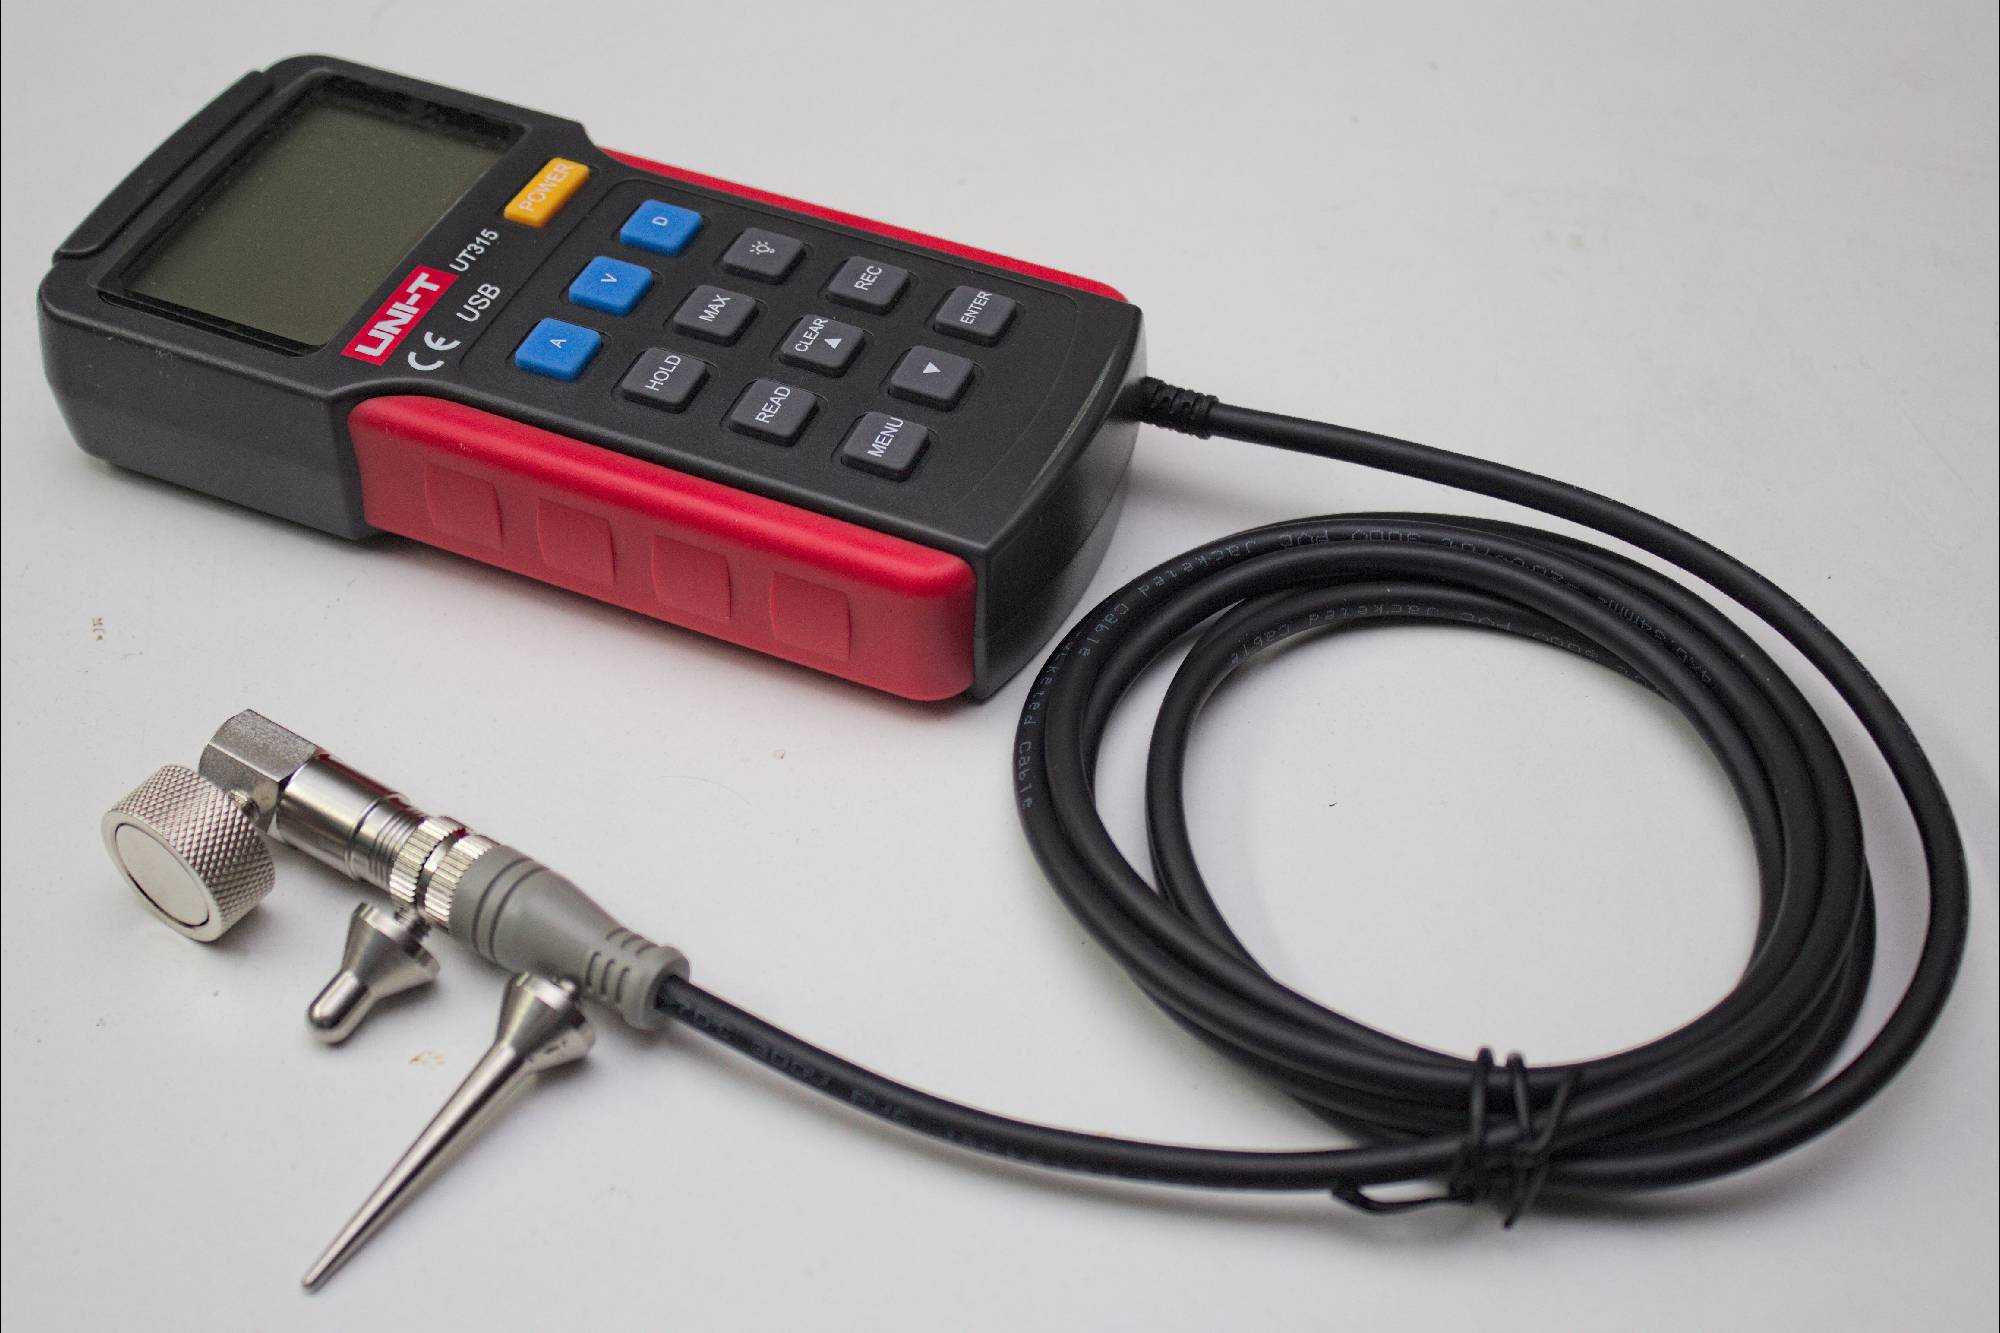 A UNI-T handheld vibration level meter / tester with various probes